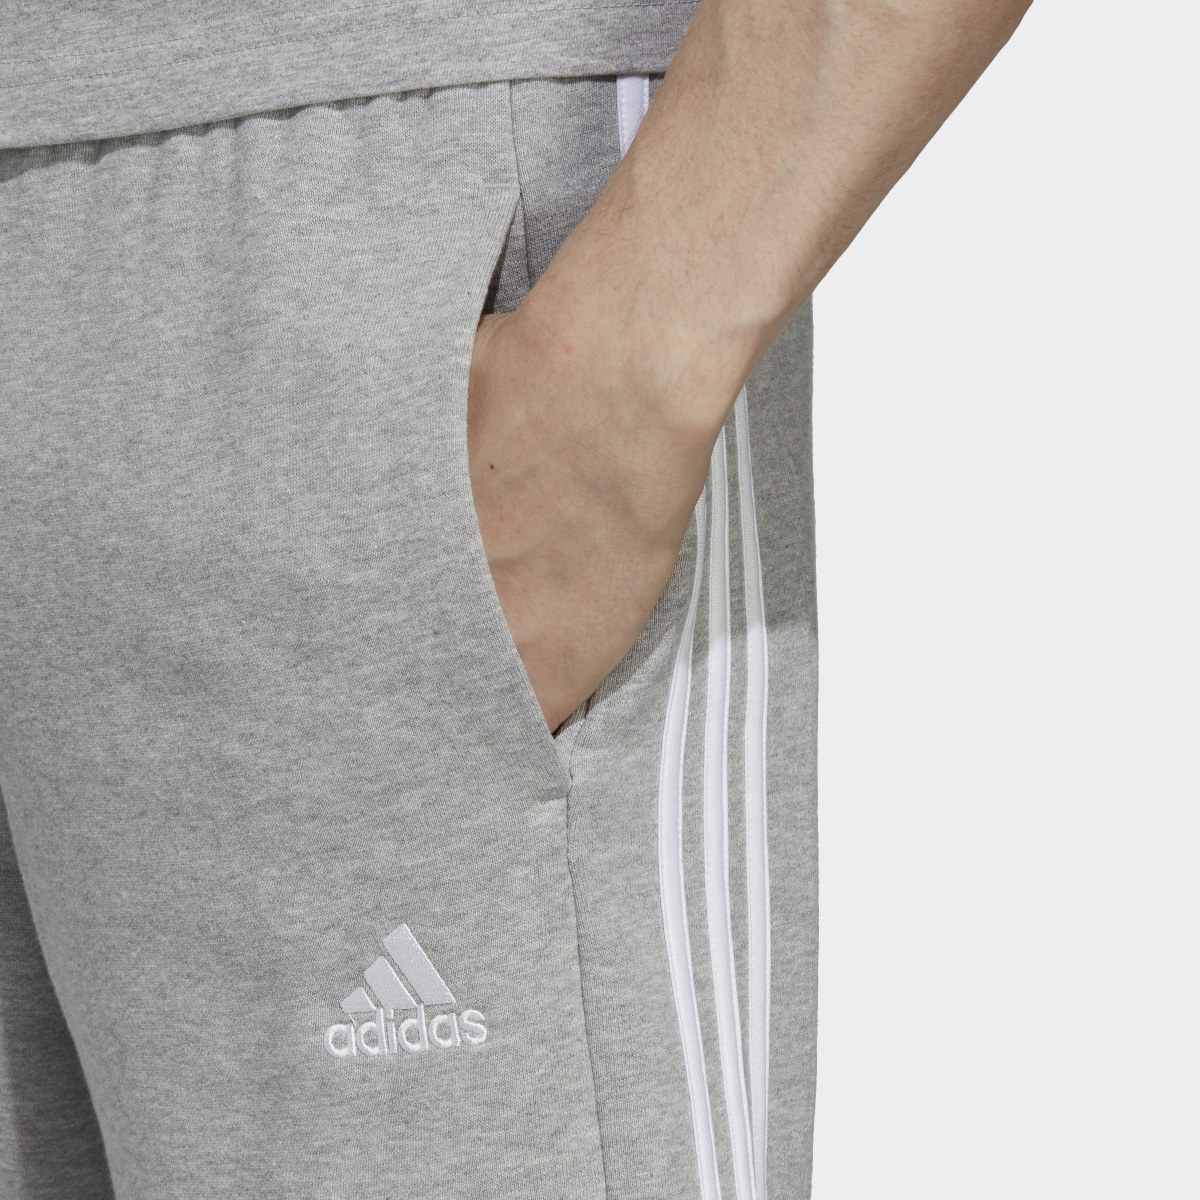 Adidas Essentials French Terry 3-Stripes Shorts. 5